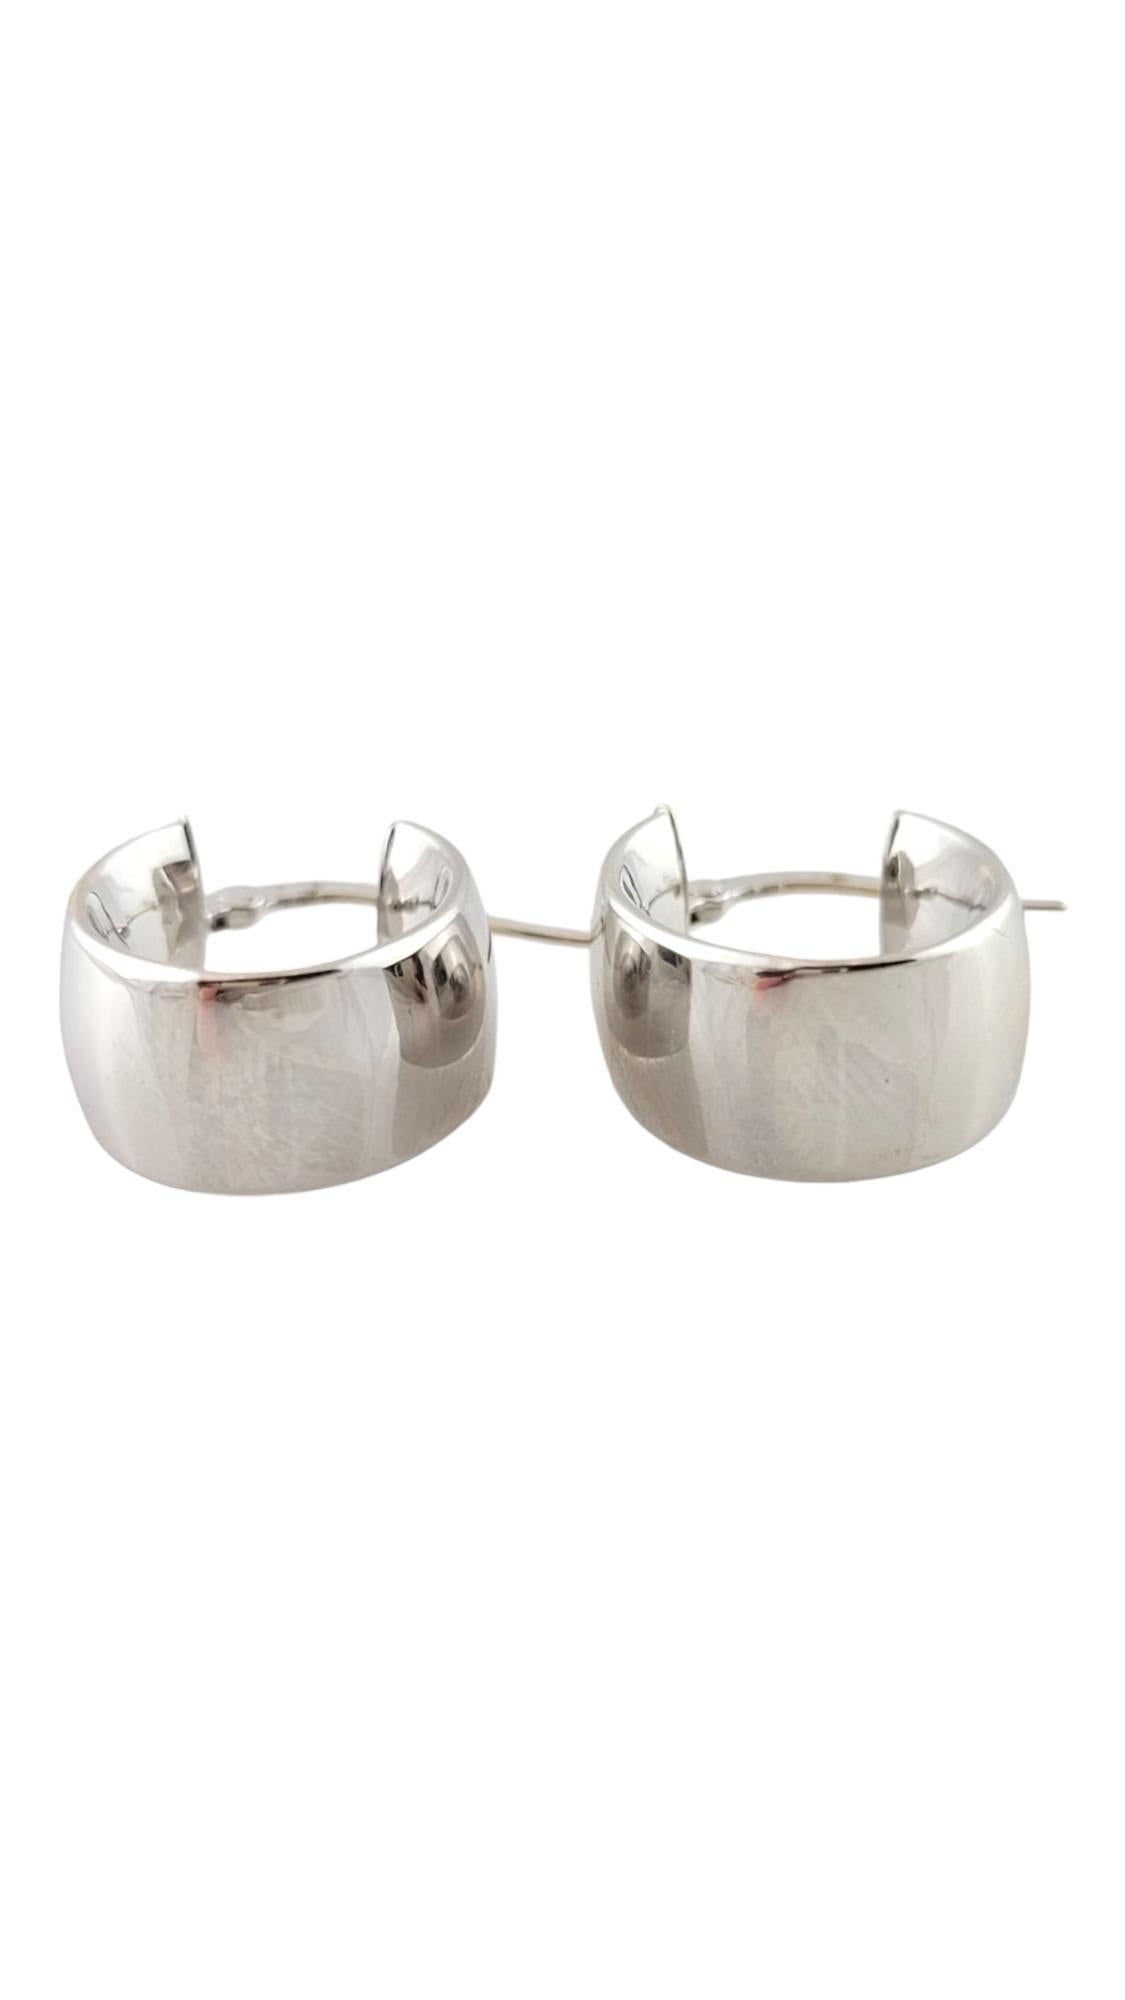 Vintage 14K White Gold Huggie Hoop Earrings

This gorgeous set of huggie hoops are beautifully crafted from 14K white gold!

Size: 19.2mm X 15.1mm X 7.8mm

7.8mm thick

Weight: 2.3 g/ 1.4 dwt

Hallmark: 14K ITALY MI

Very good condition,